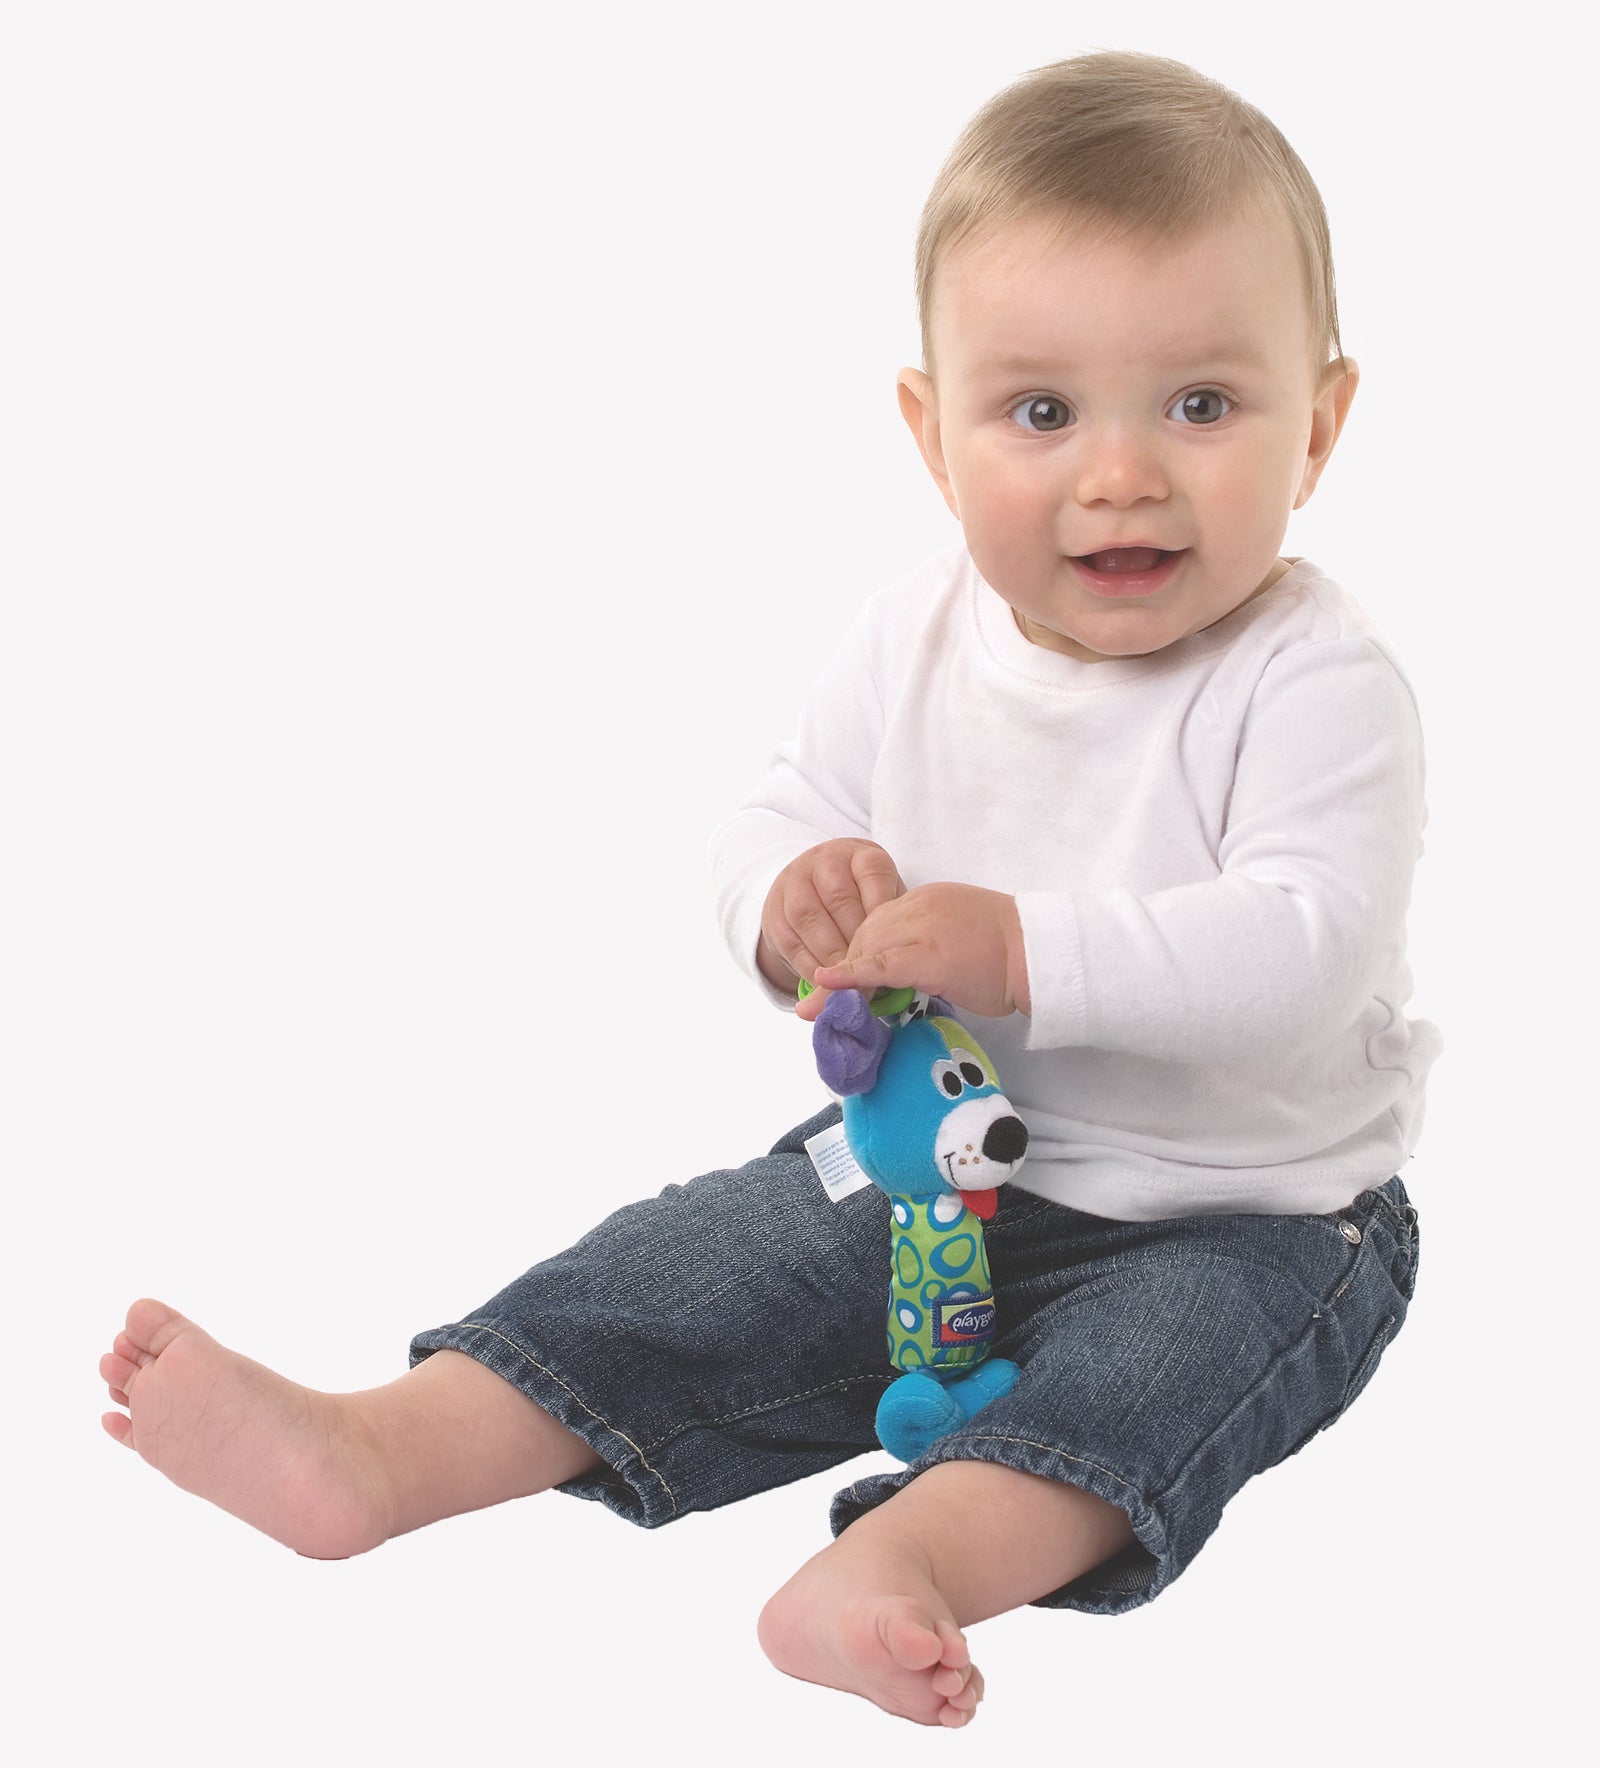 A baby boy holding PLaygro Tinker Toy on his hand